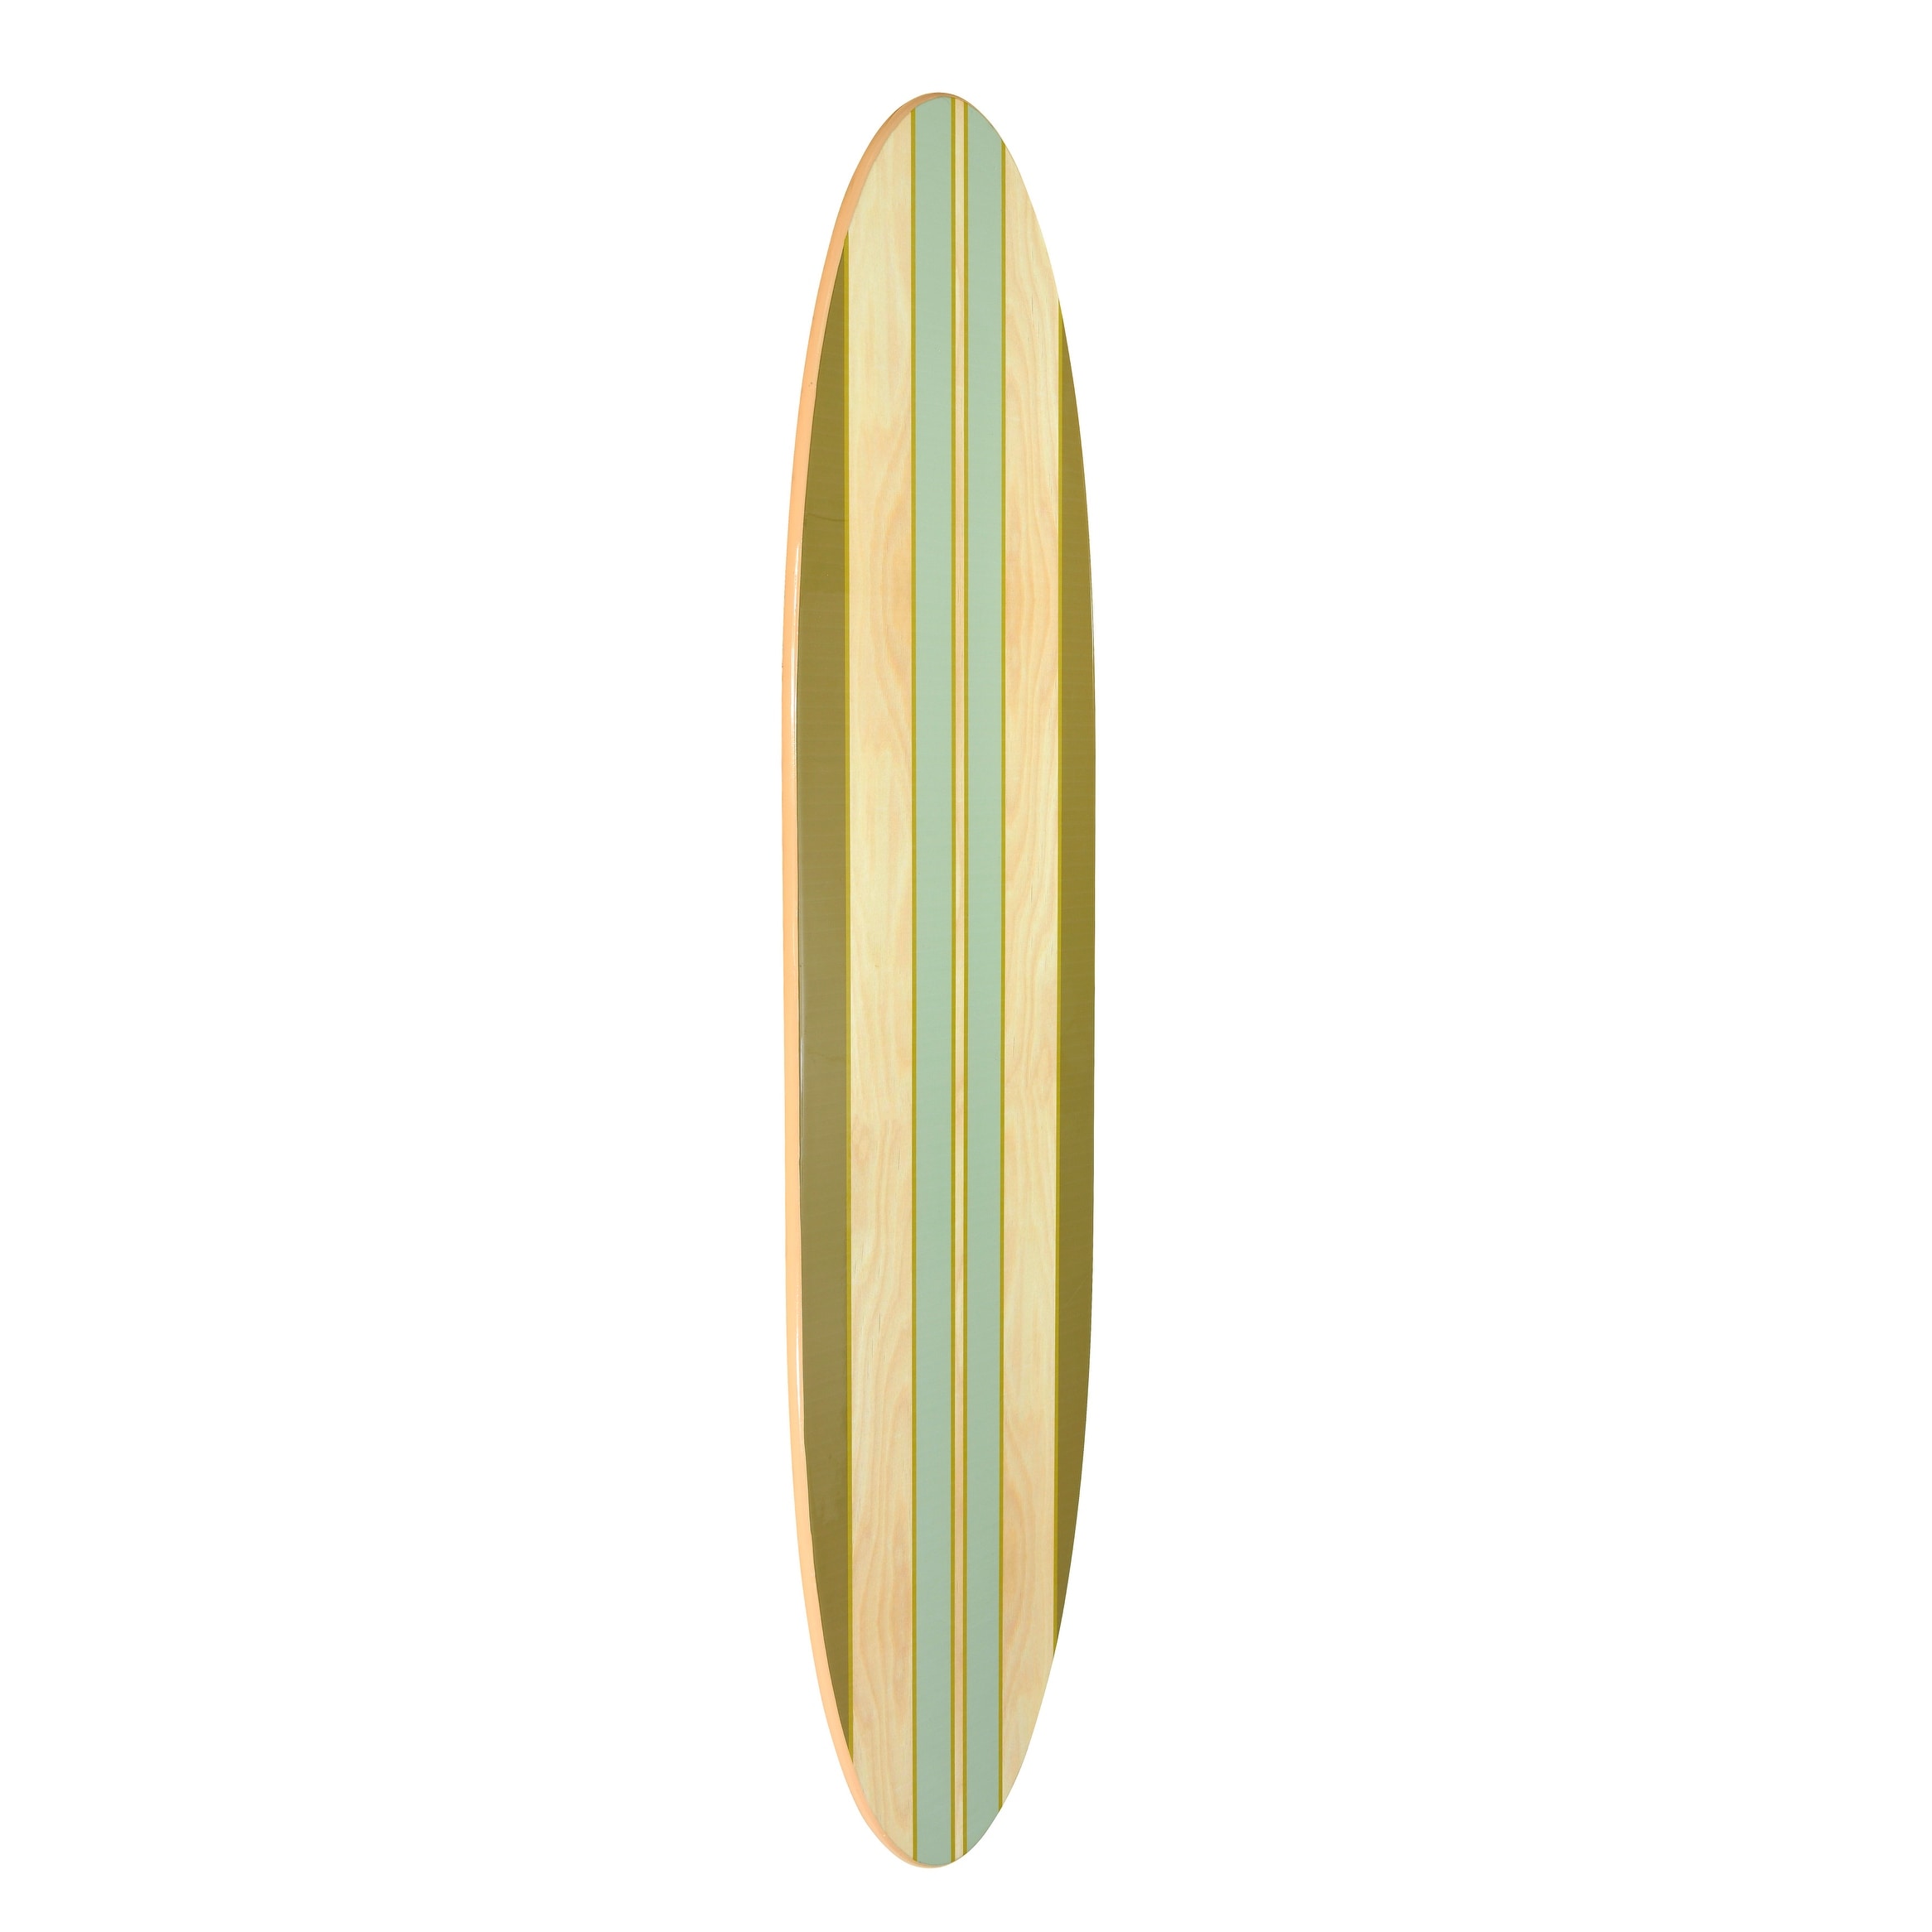 Lacquered Wood Surfboard Wall Dundefinedcor (Hangs Vertical or Horizontal)  On Sale Bed Bath  Beyond 34865086